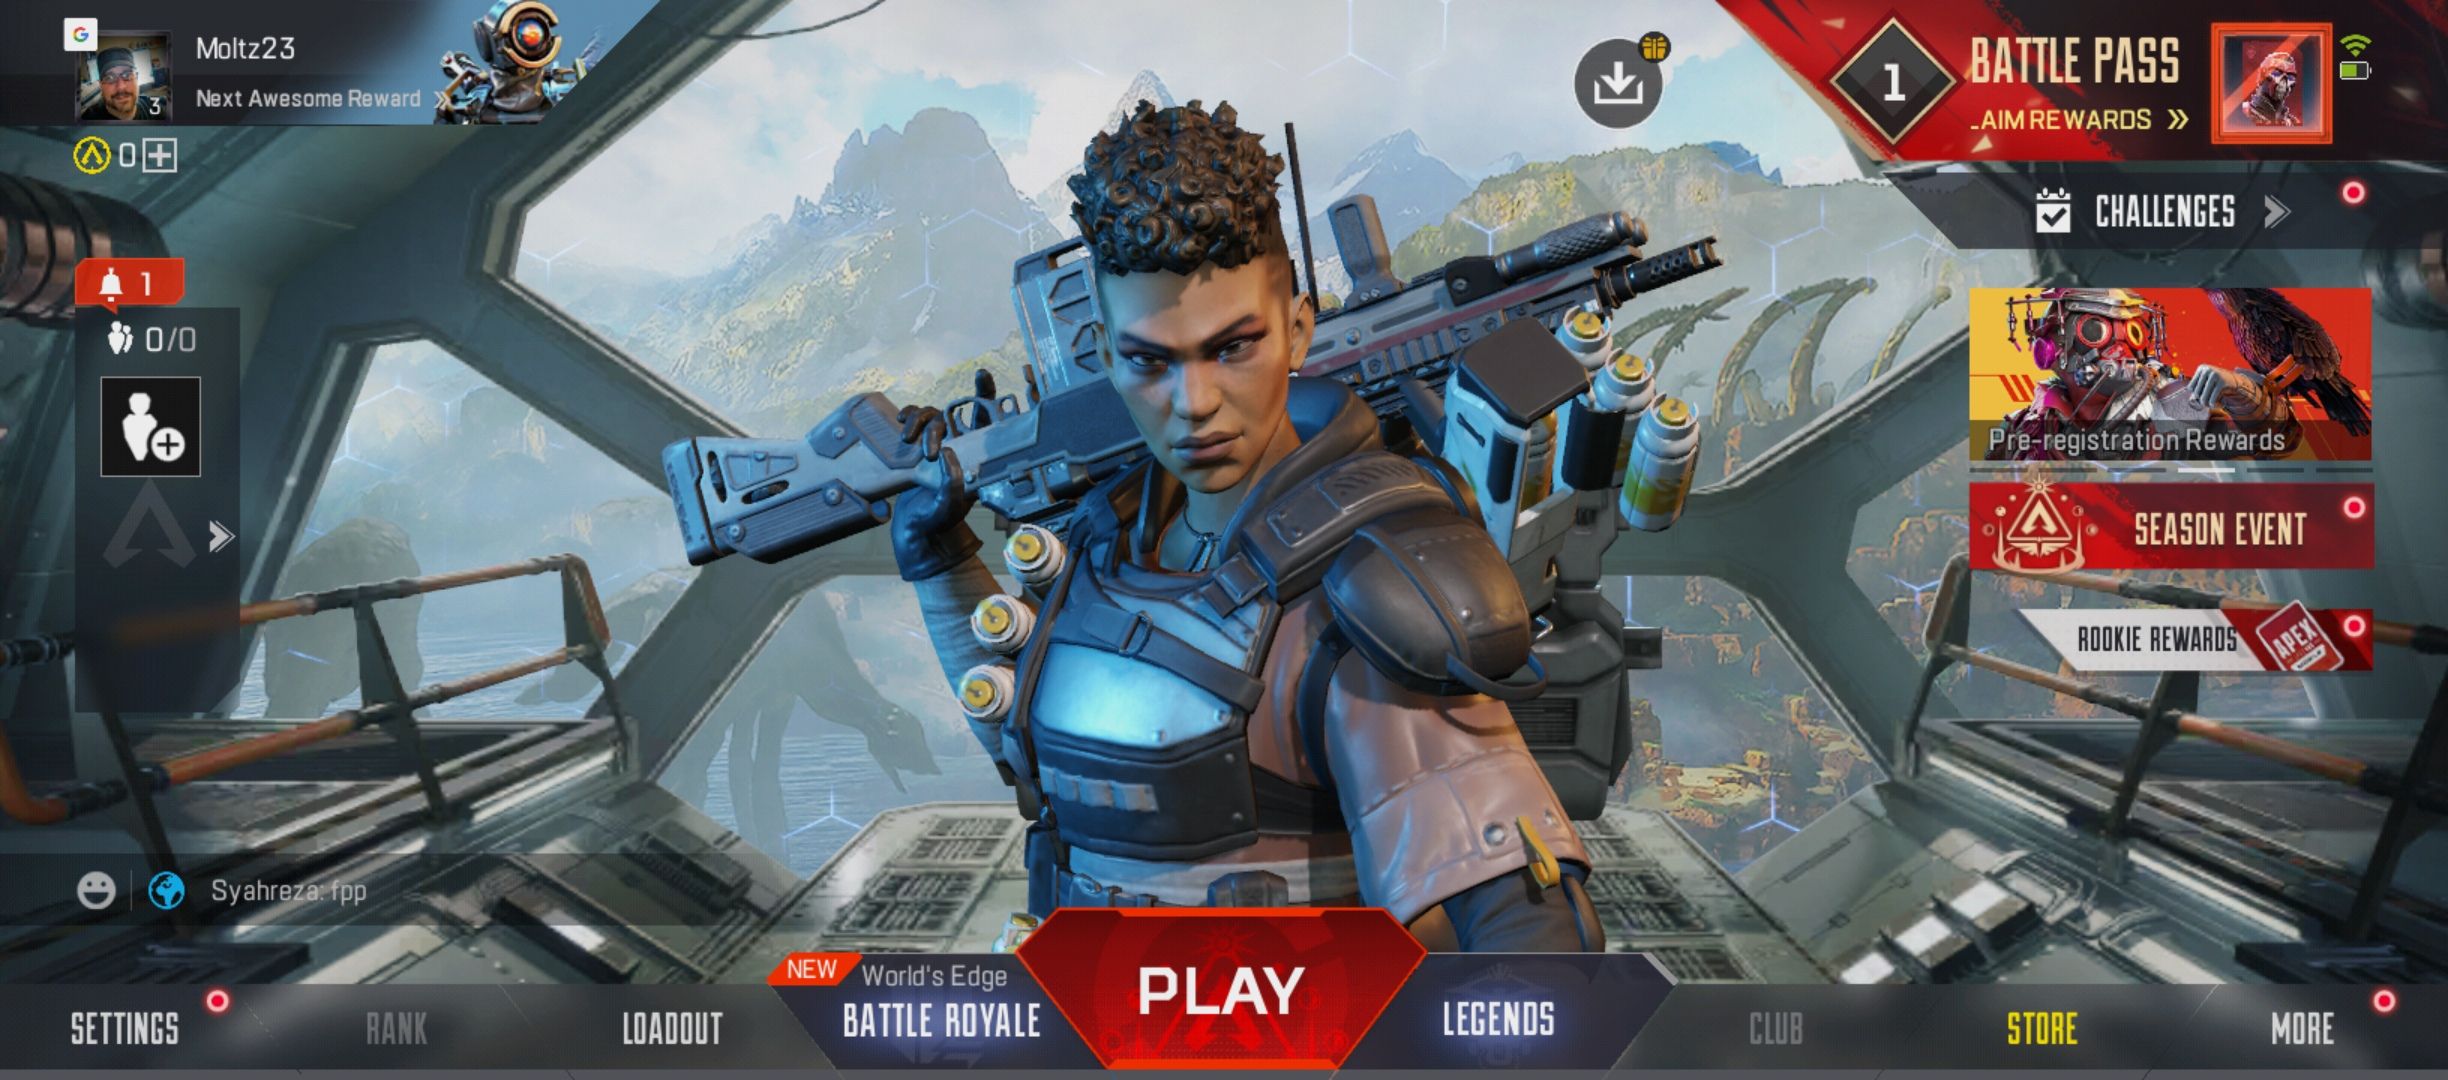 APEX LEGENDS MOBILE IS BACK!! (NEW GAMEPLAY) 